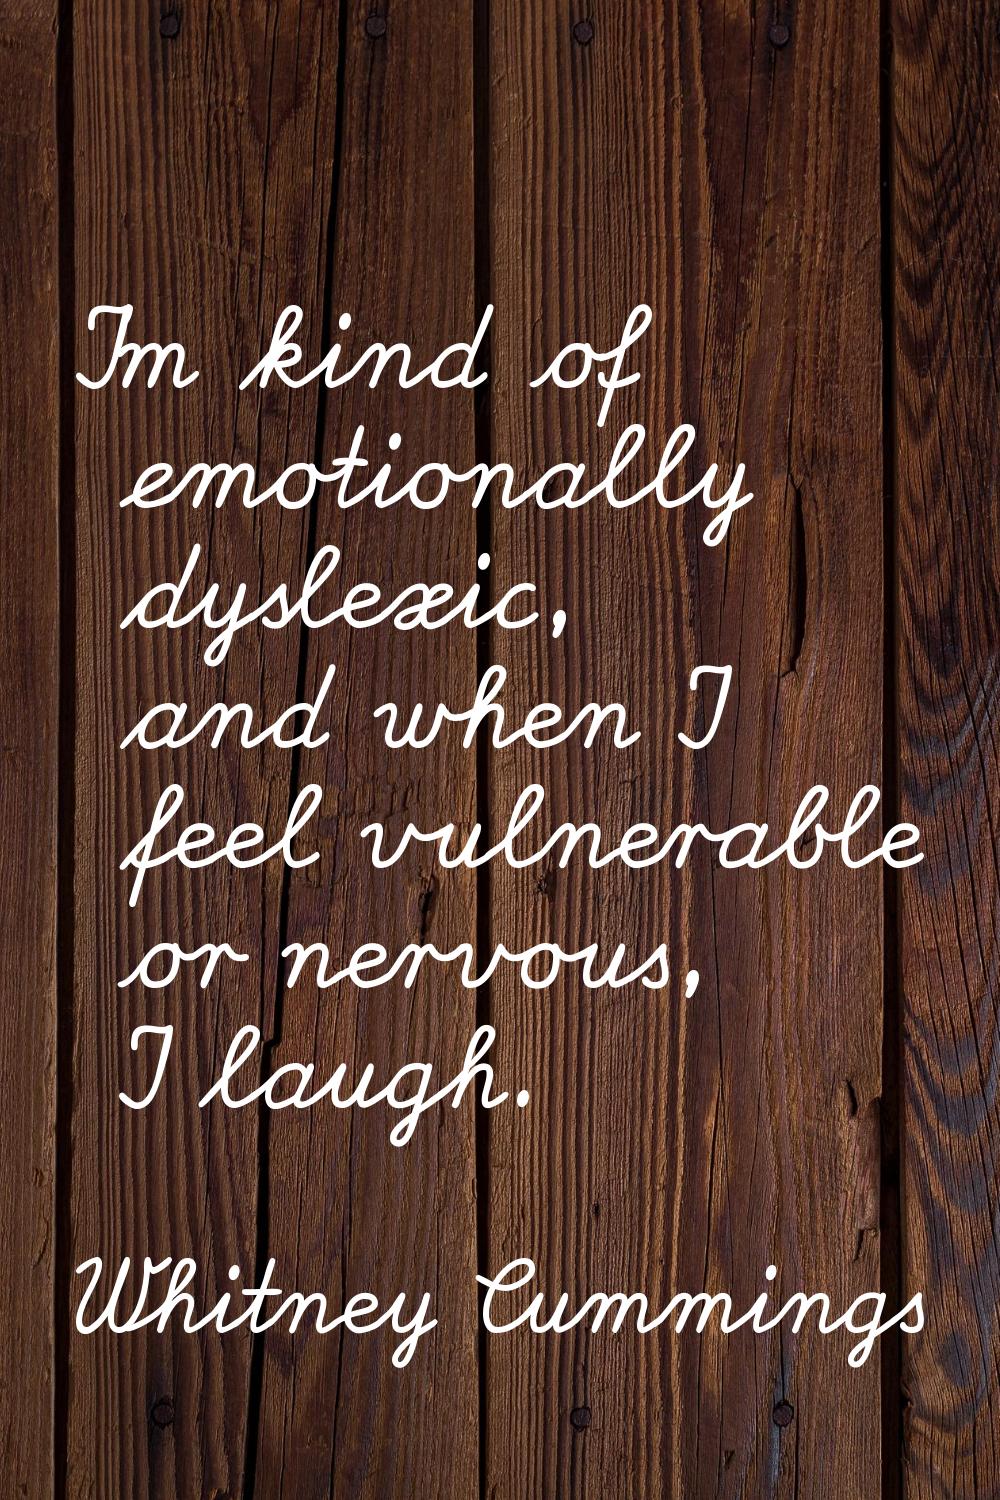 I'm kind of emotionally dyslexic, and when I feel vulnerable or nervous, I laugh.